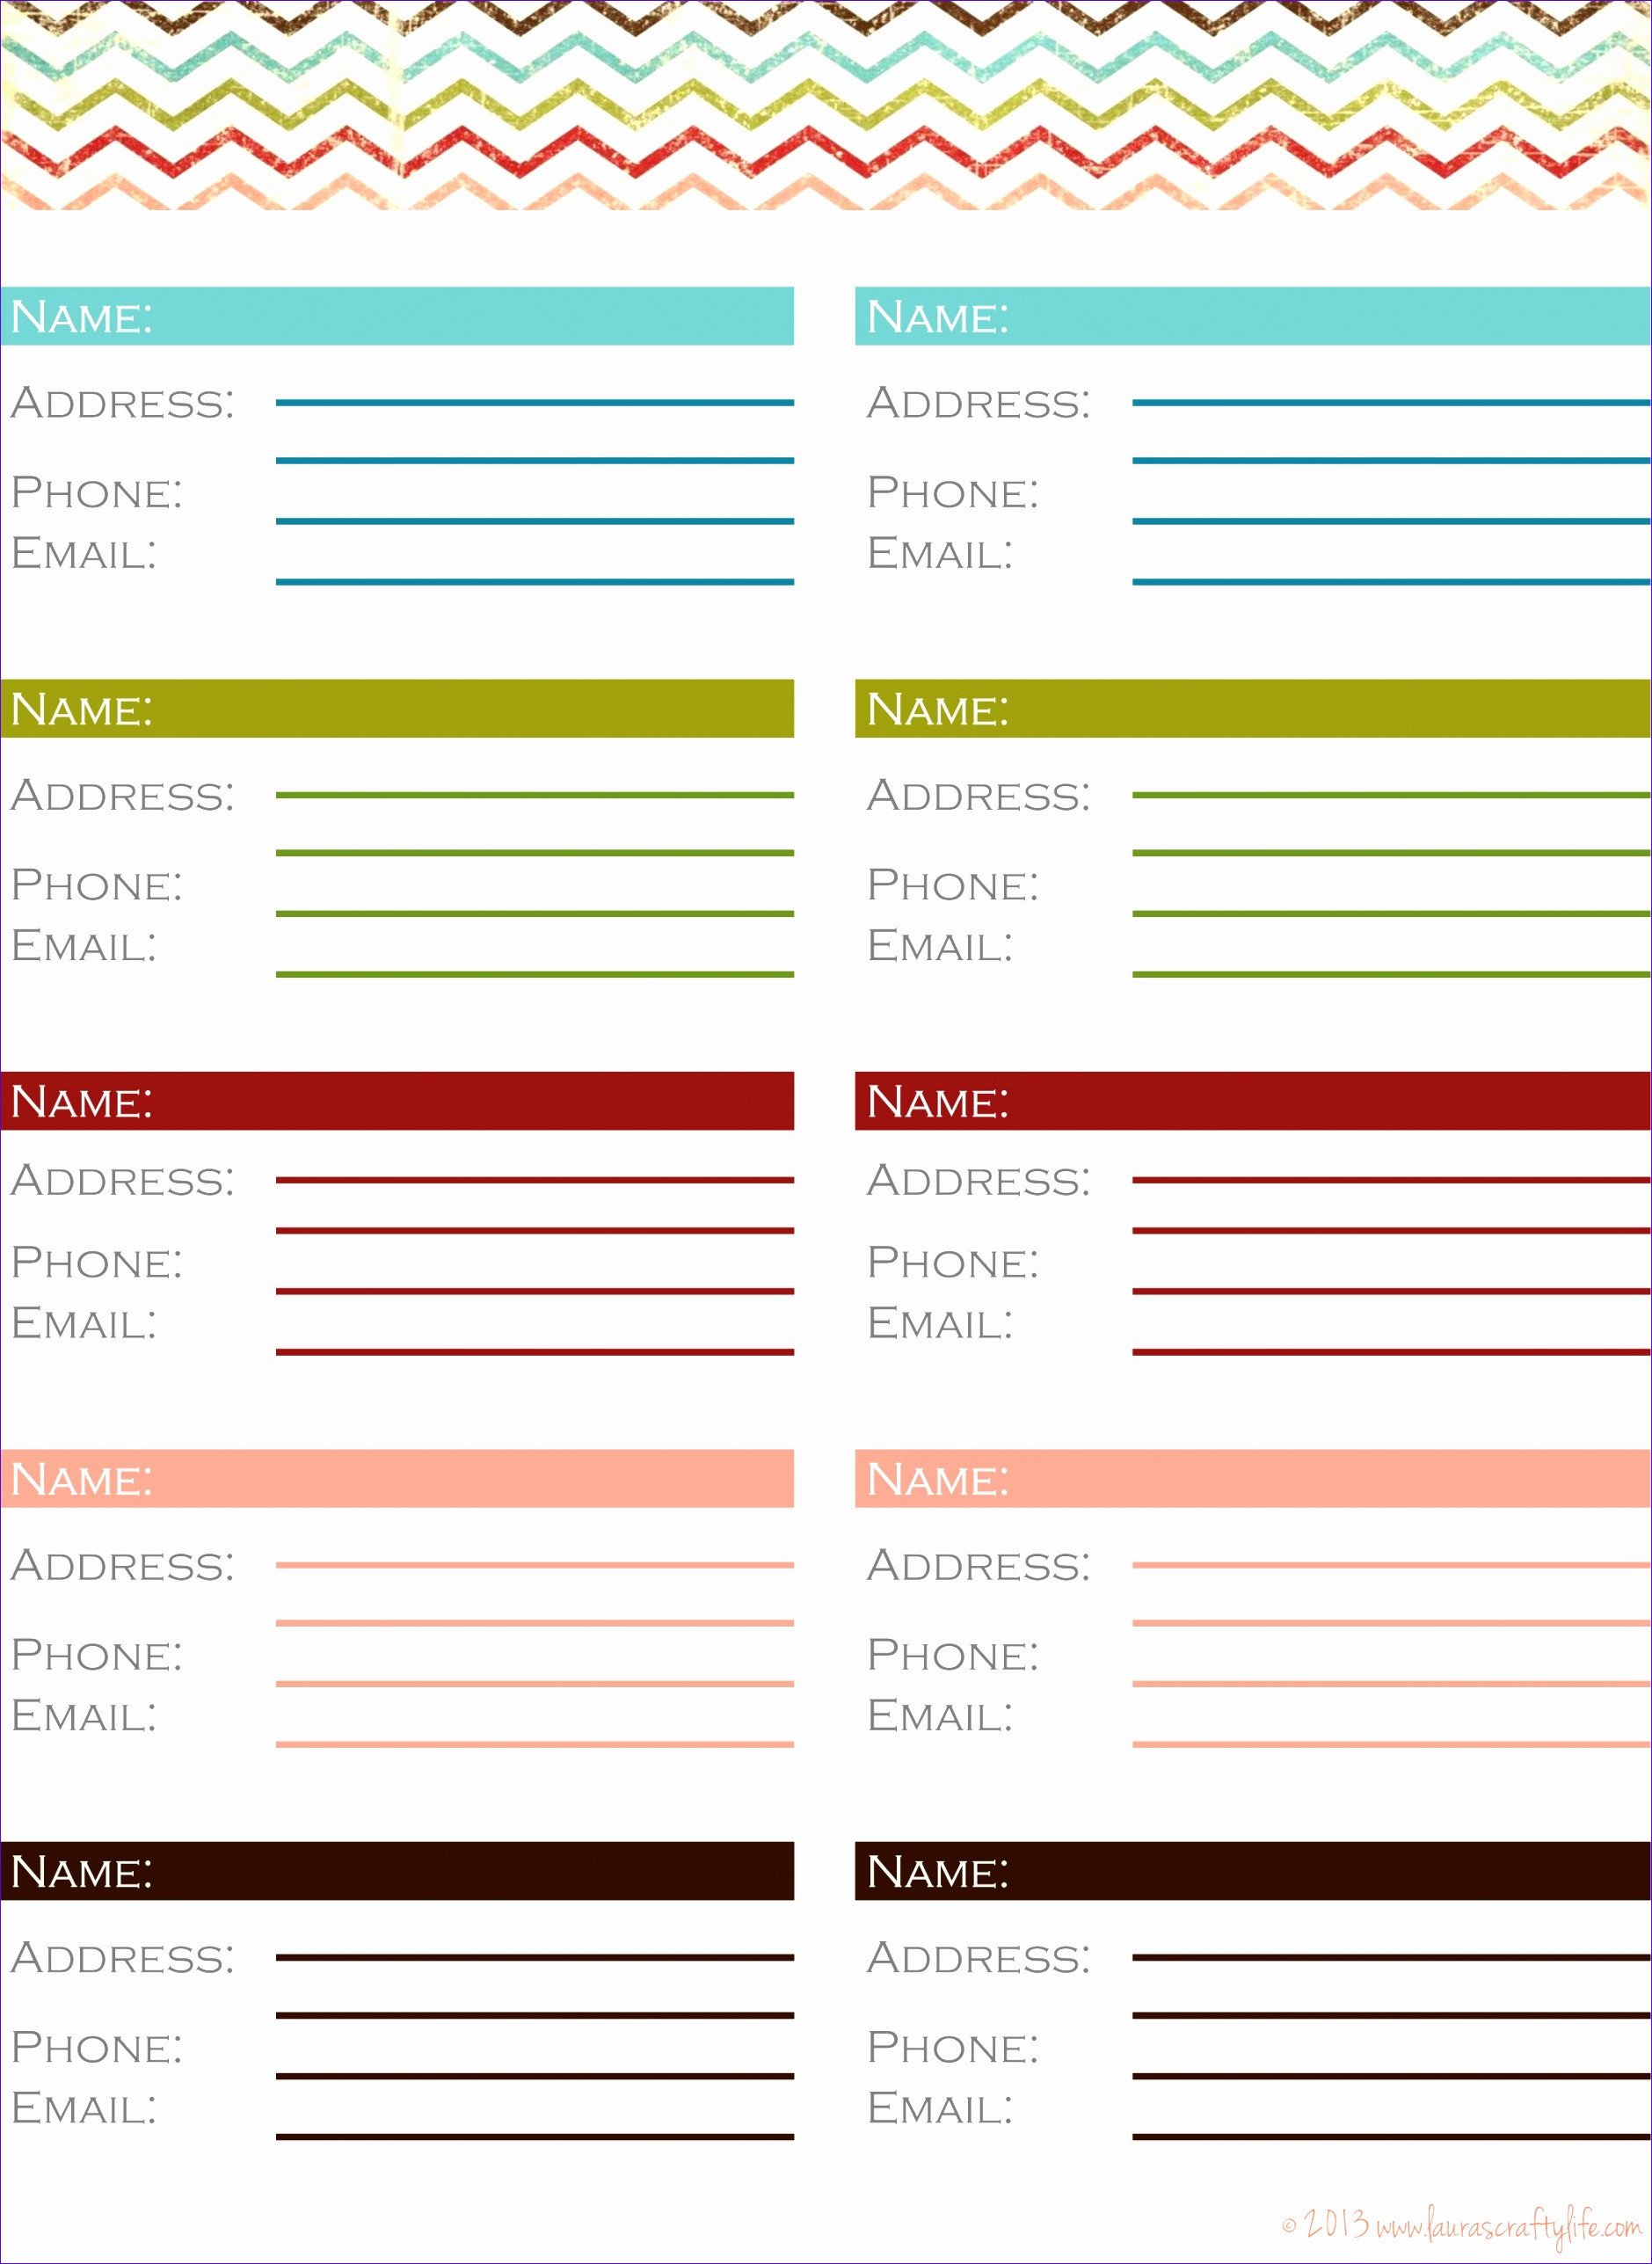 Address Book Template Excel 10 Phone Book Excel Template Exceltemplates Exceltemplates